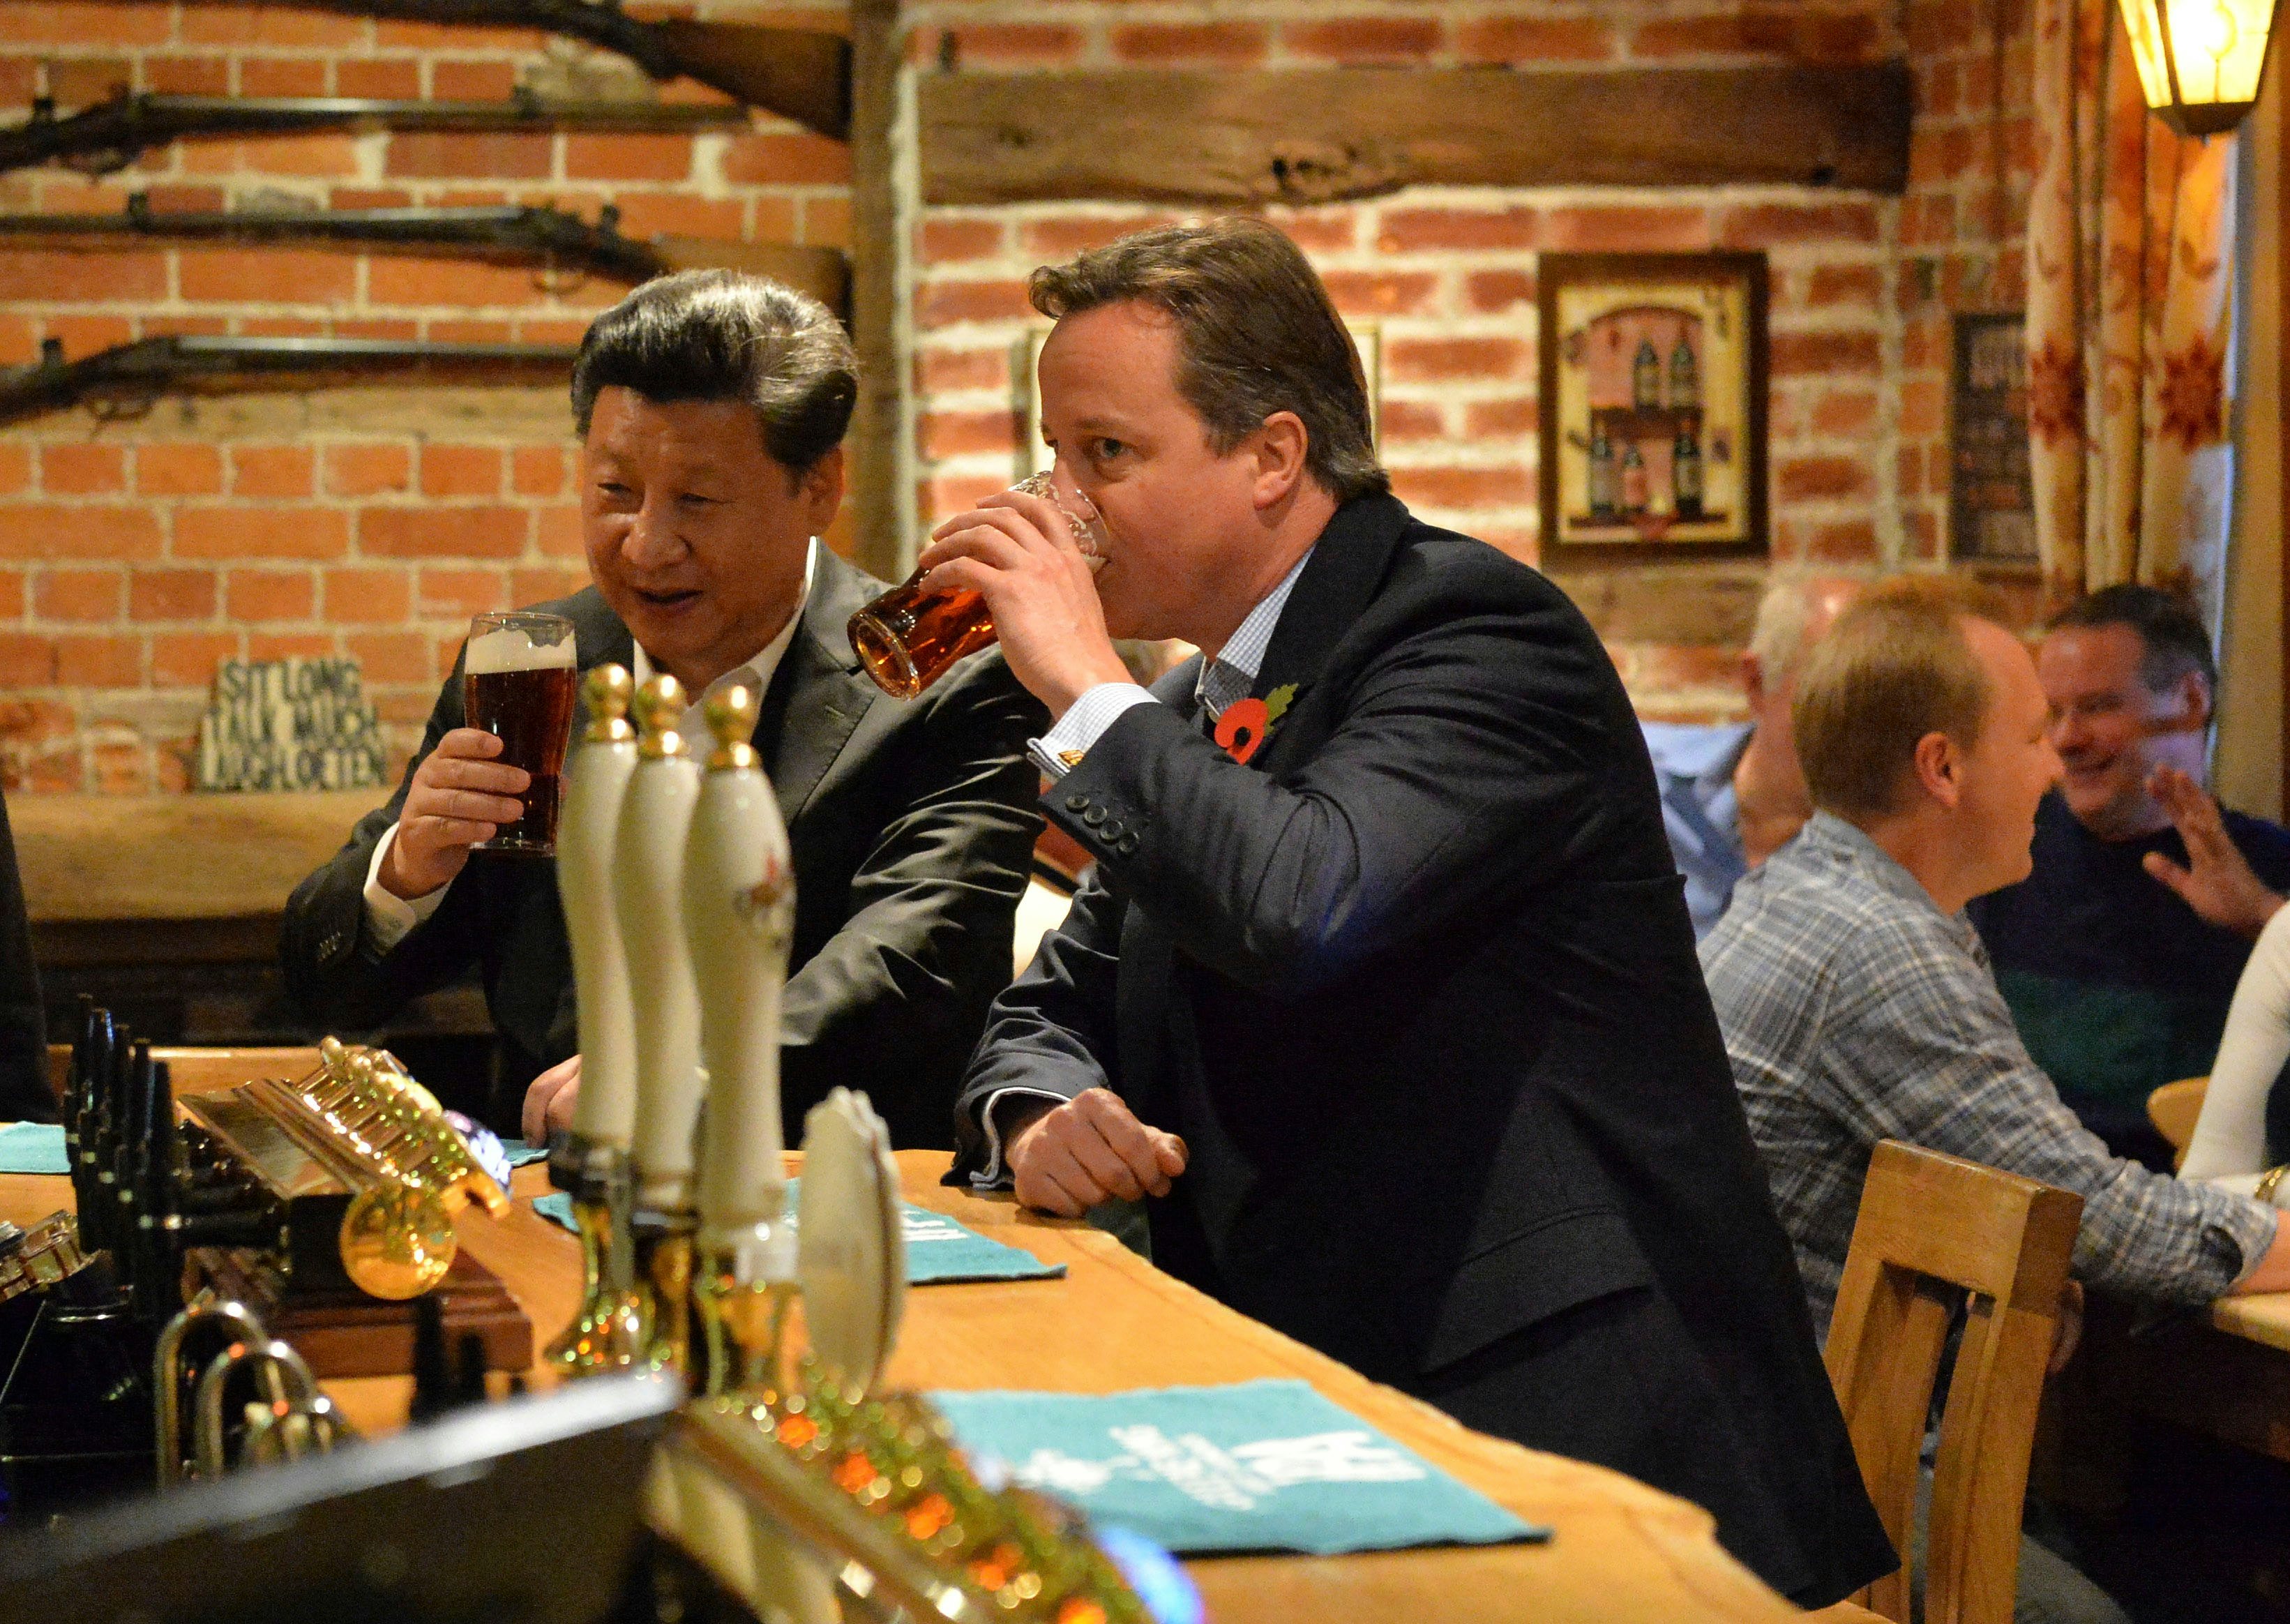 The United Kingdom risks seeing fewer Chinese tourists in its pubs and around its sights after the Brexit. (The Prime Minister's Office, <a href="https://www.flickr.com/photos/number10gov/22206733049/">flickr</a>)